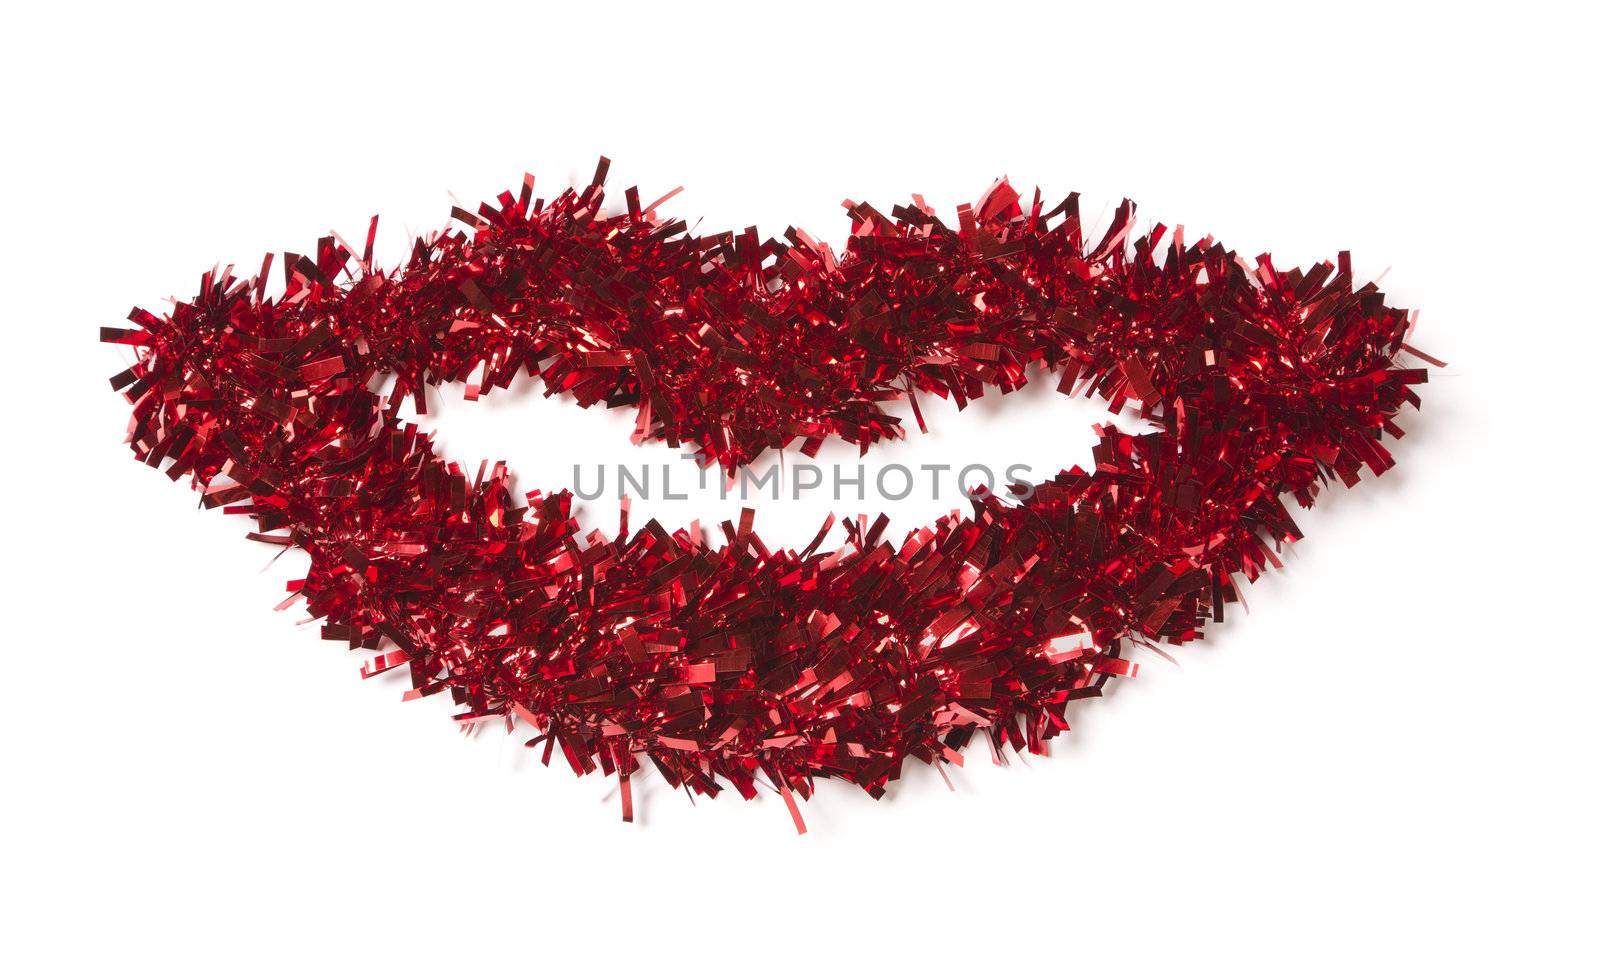 Lip Shaped Red Tinsel on White by Feverpitched